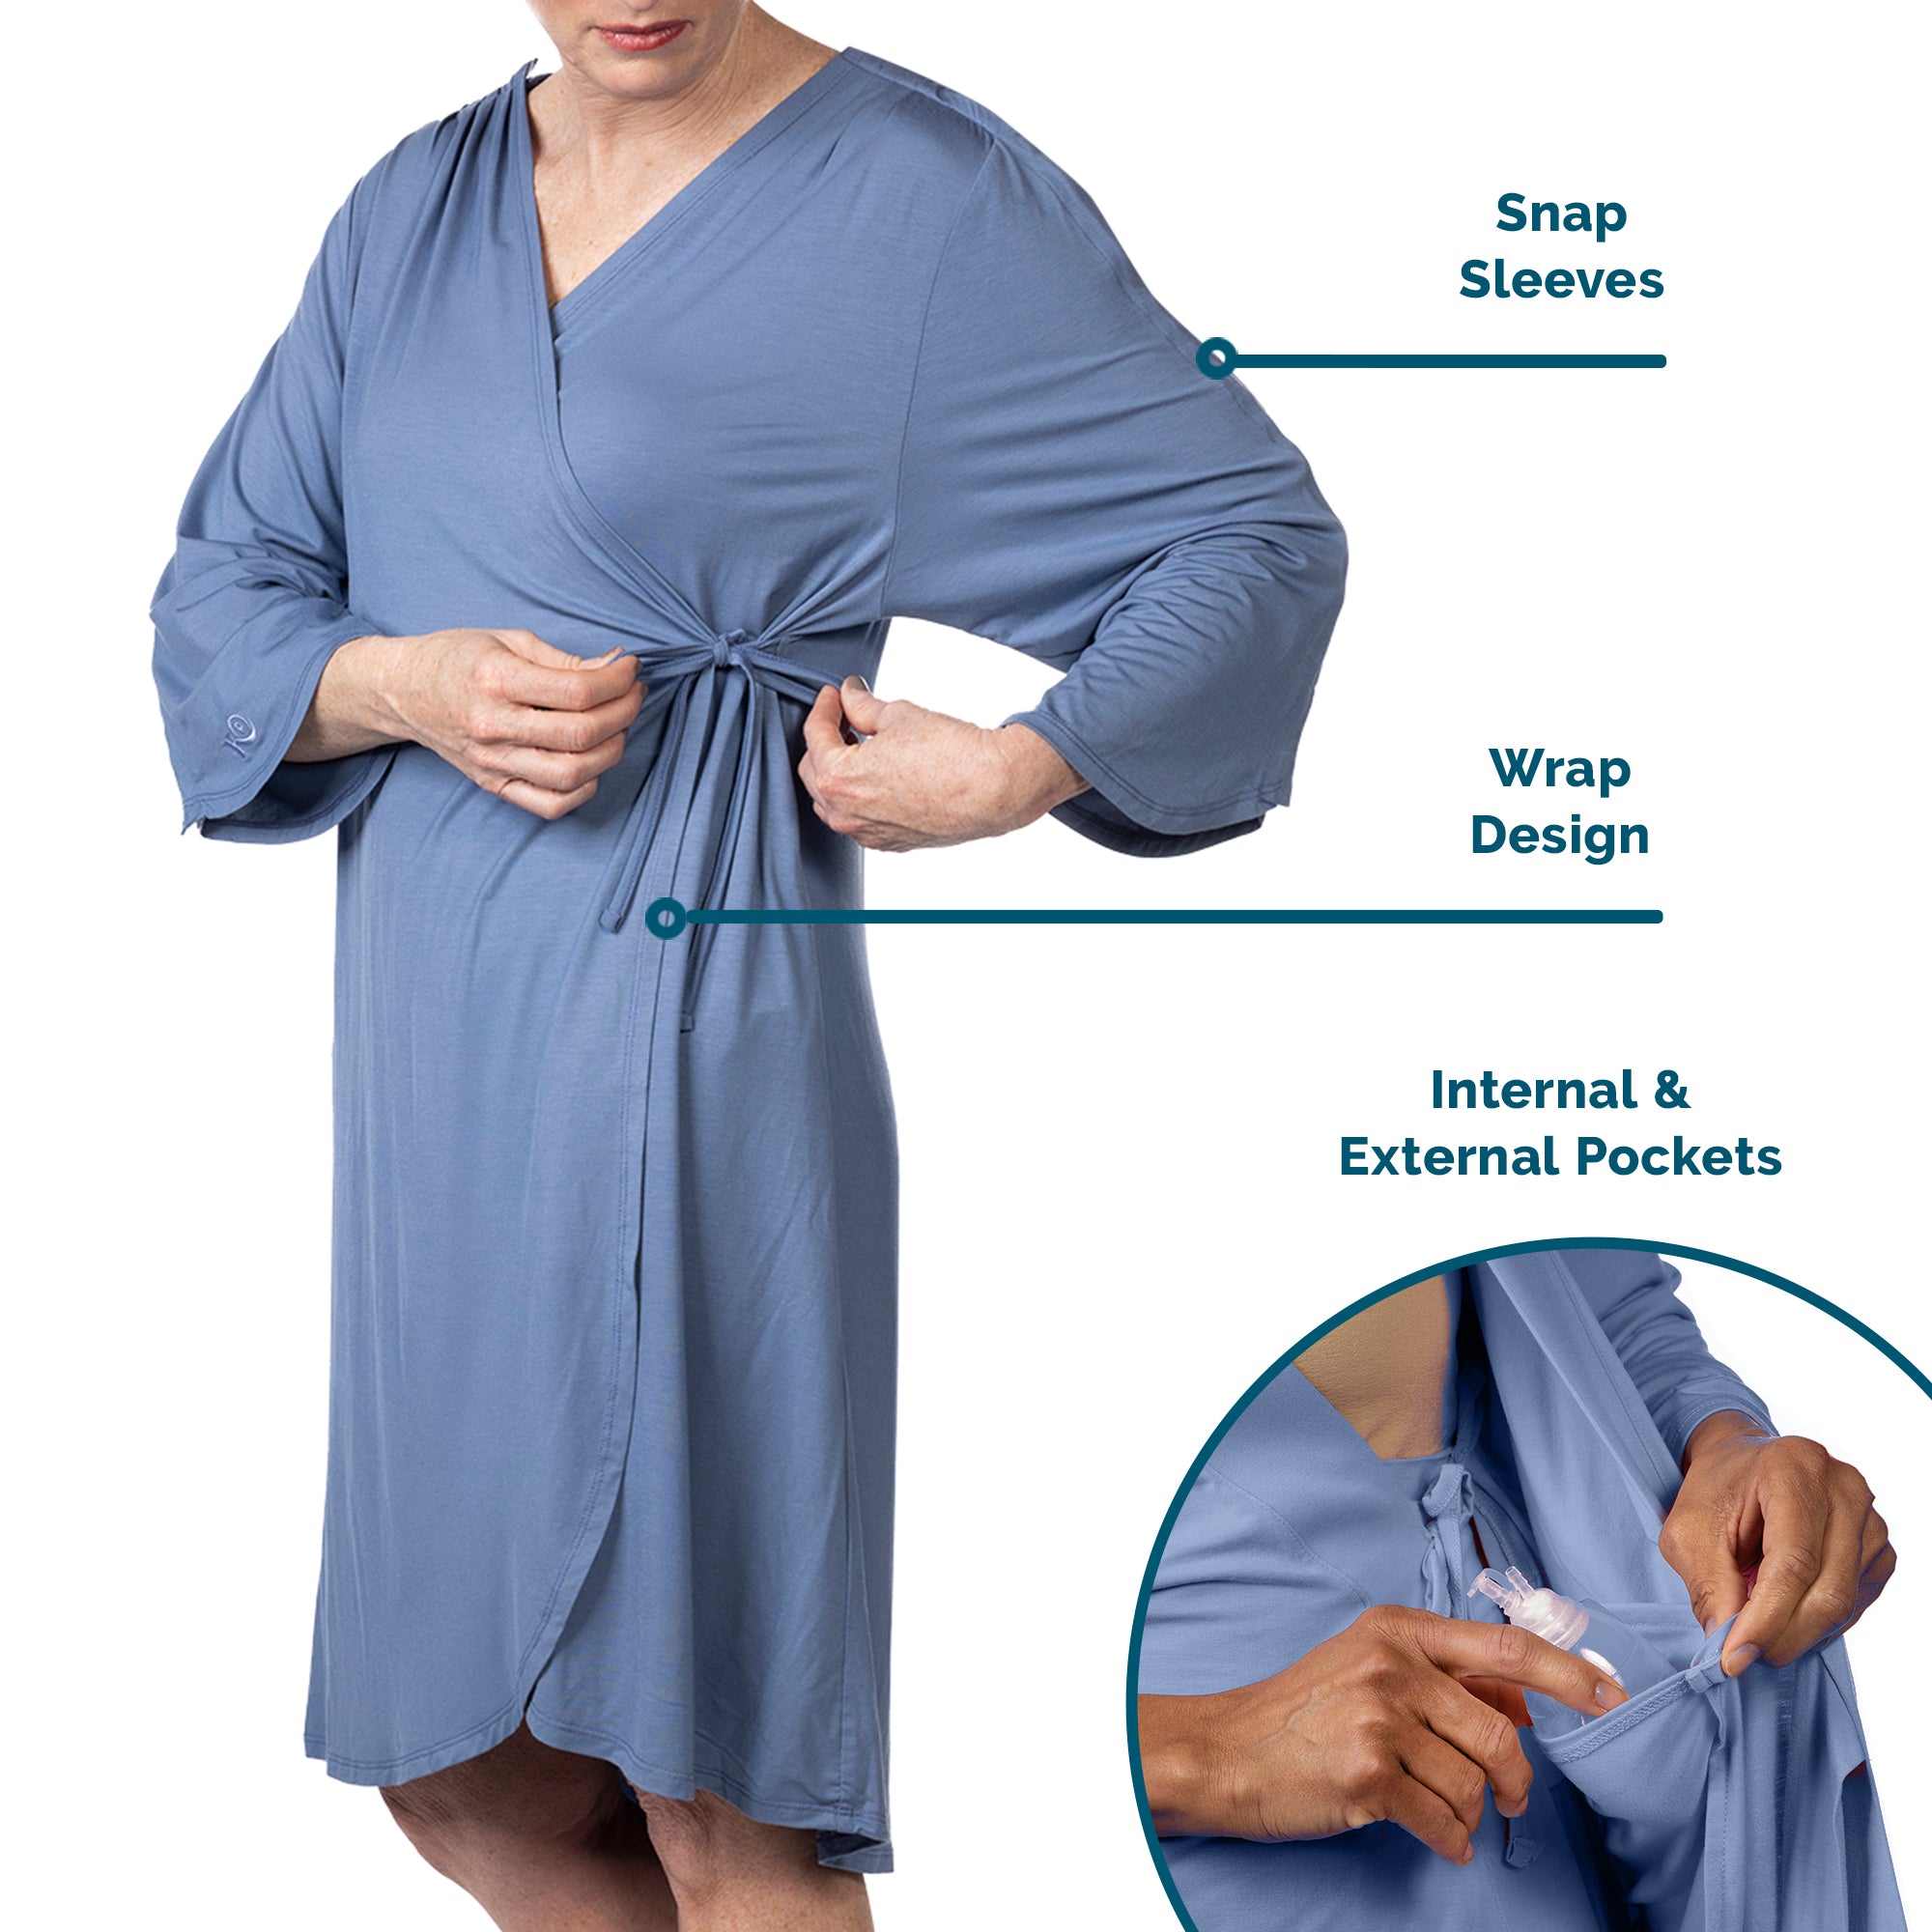 Dropship Cotton Hospital Gowns For Women. Patient Robes Medium. Pack Of 3  White Hospital Gowns For Men With Front And Back Snap Closure; Hospital Gown  With Short Sleeves. Medical Patient Gowns to